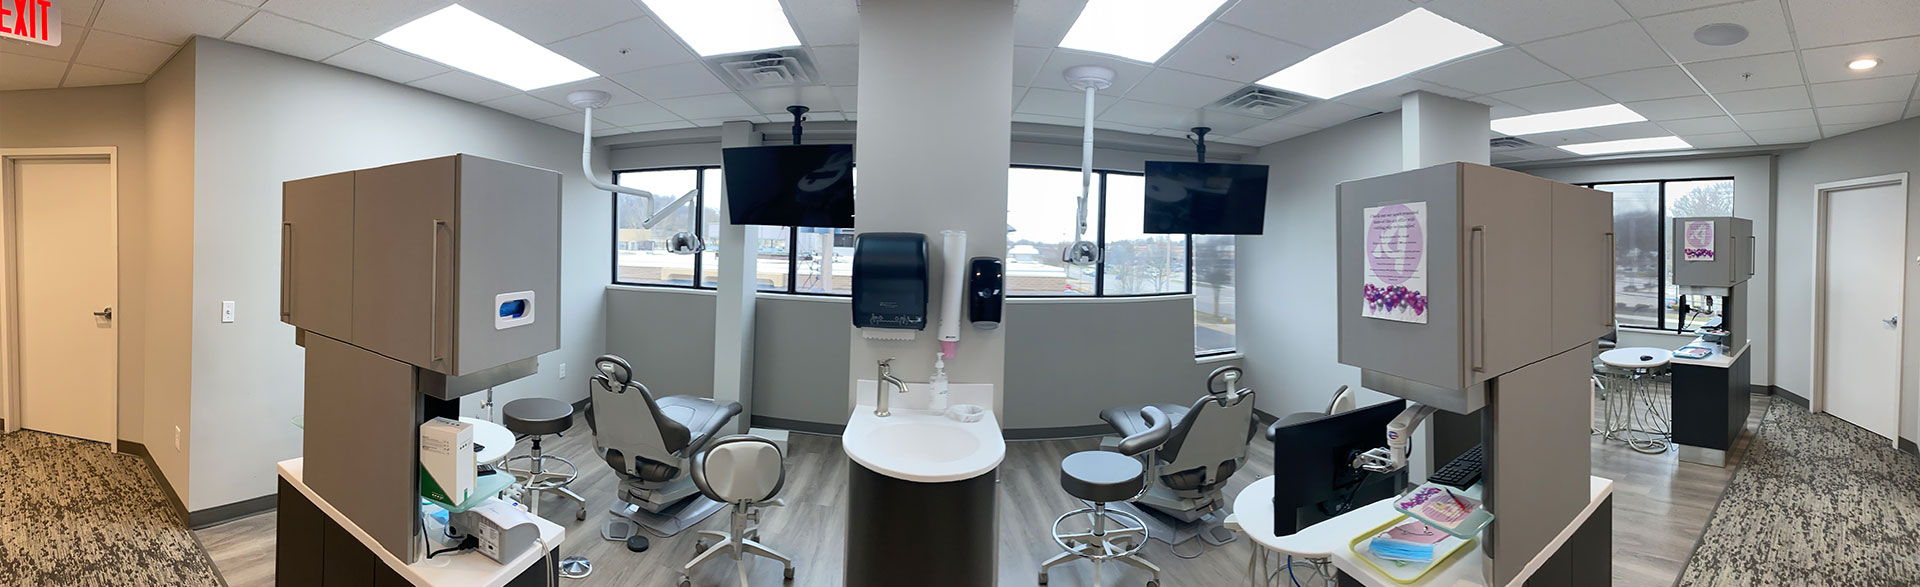 Arsmiles Family and Cosmetic Dentistry inside view